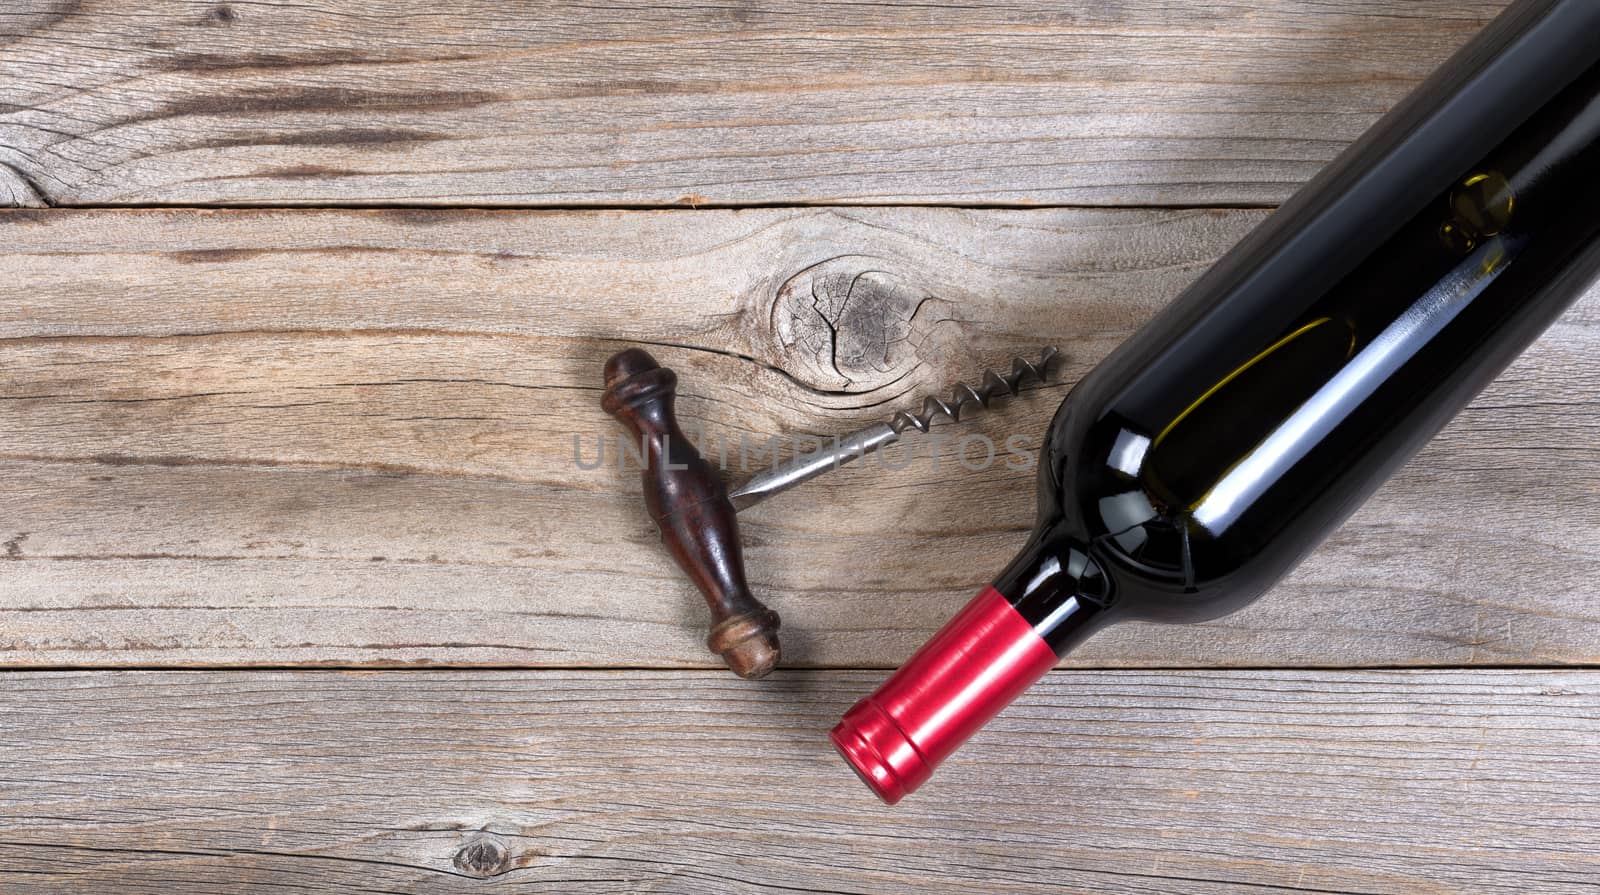 Unopen bottle of red wine with vintage corkscrew on rustic woode by tab1962